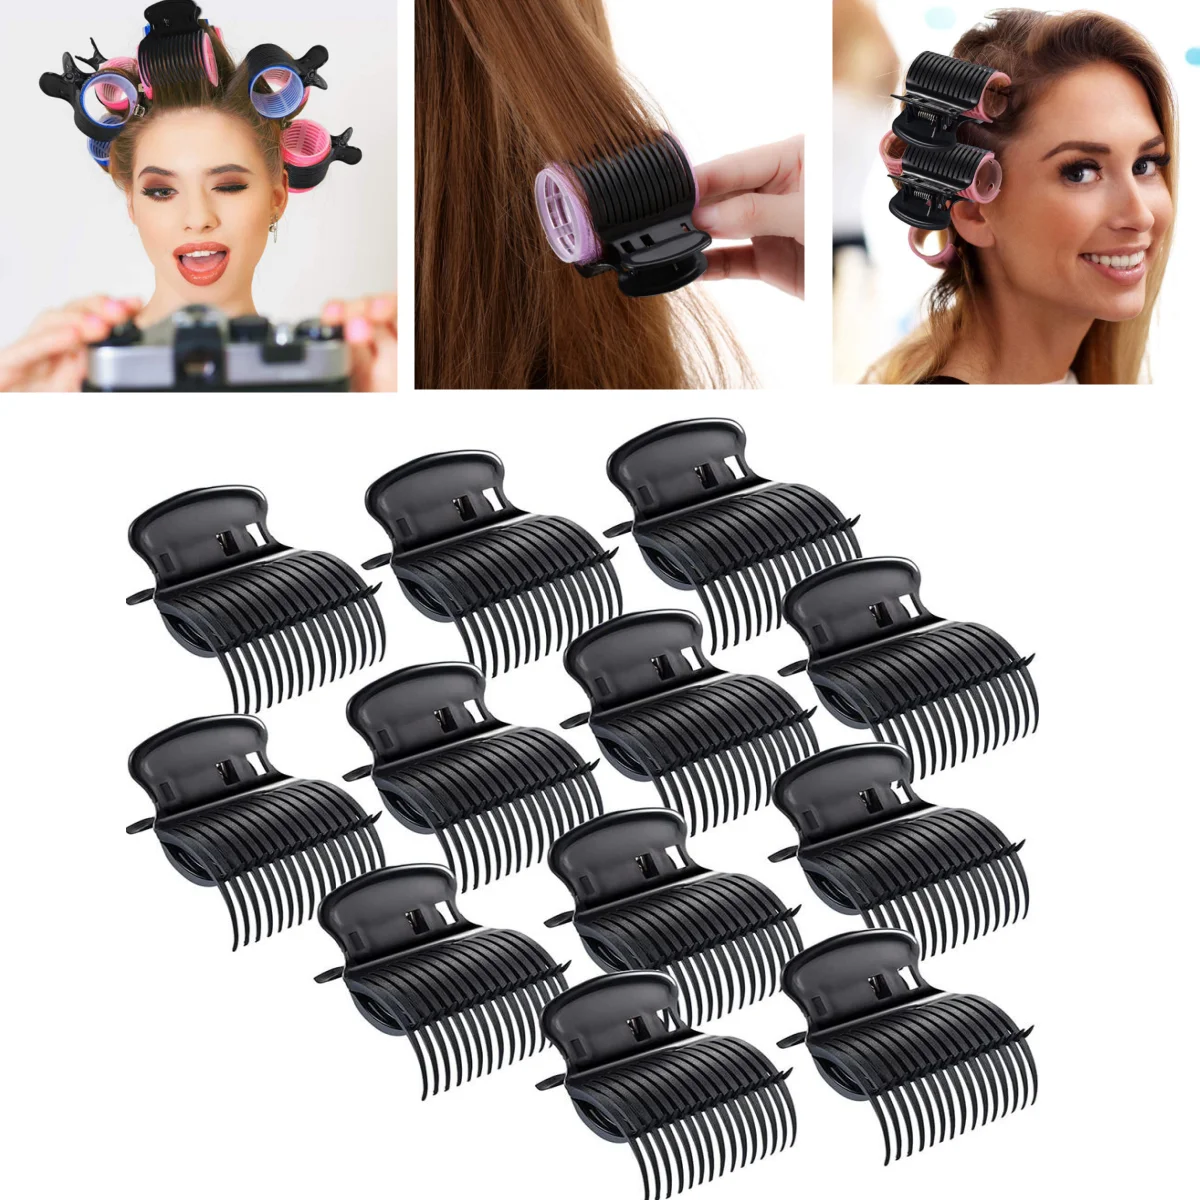 Hairdresser Supplies Hairdressing Equipment Hair Roller Clips Hair Curler Clamps Hair Color Clips